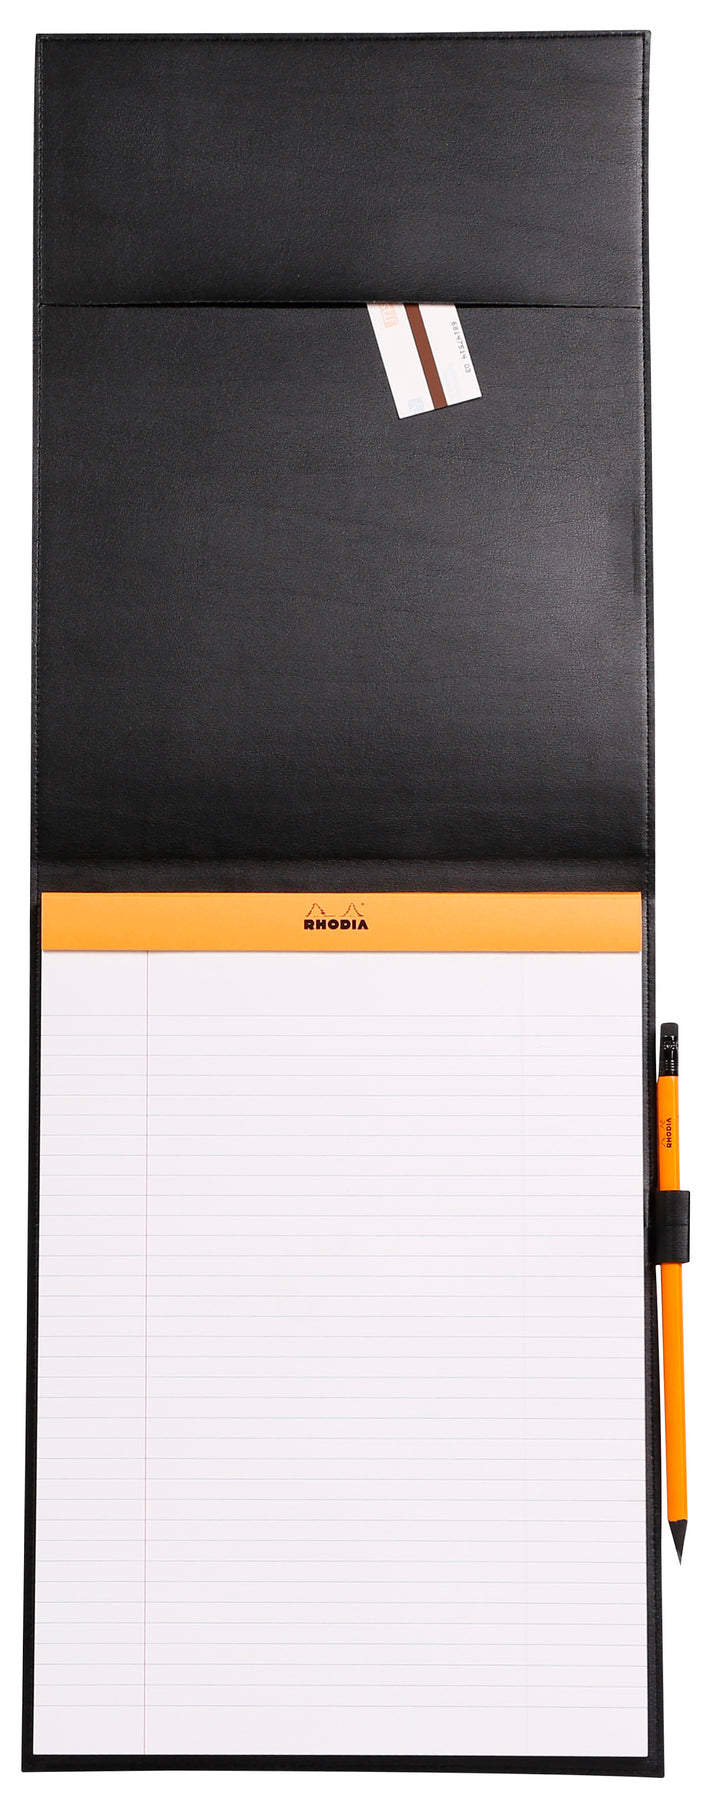 Rhodia Boutique Black Stapled Line Ruled Notepad with Leatherette Cover - A4